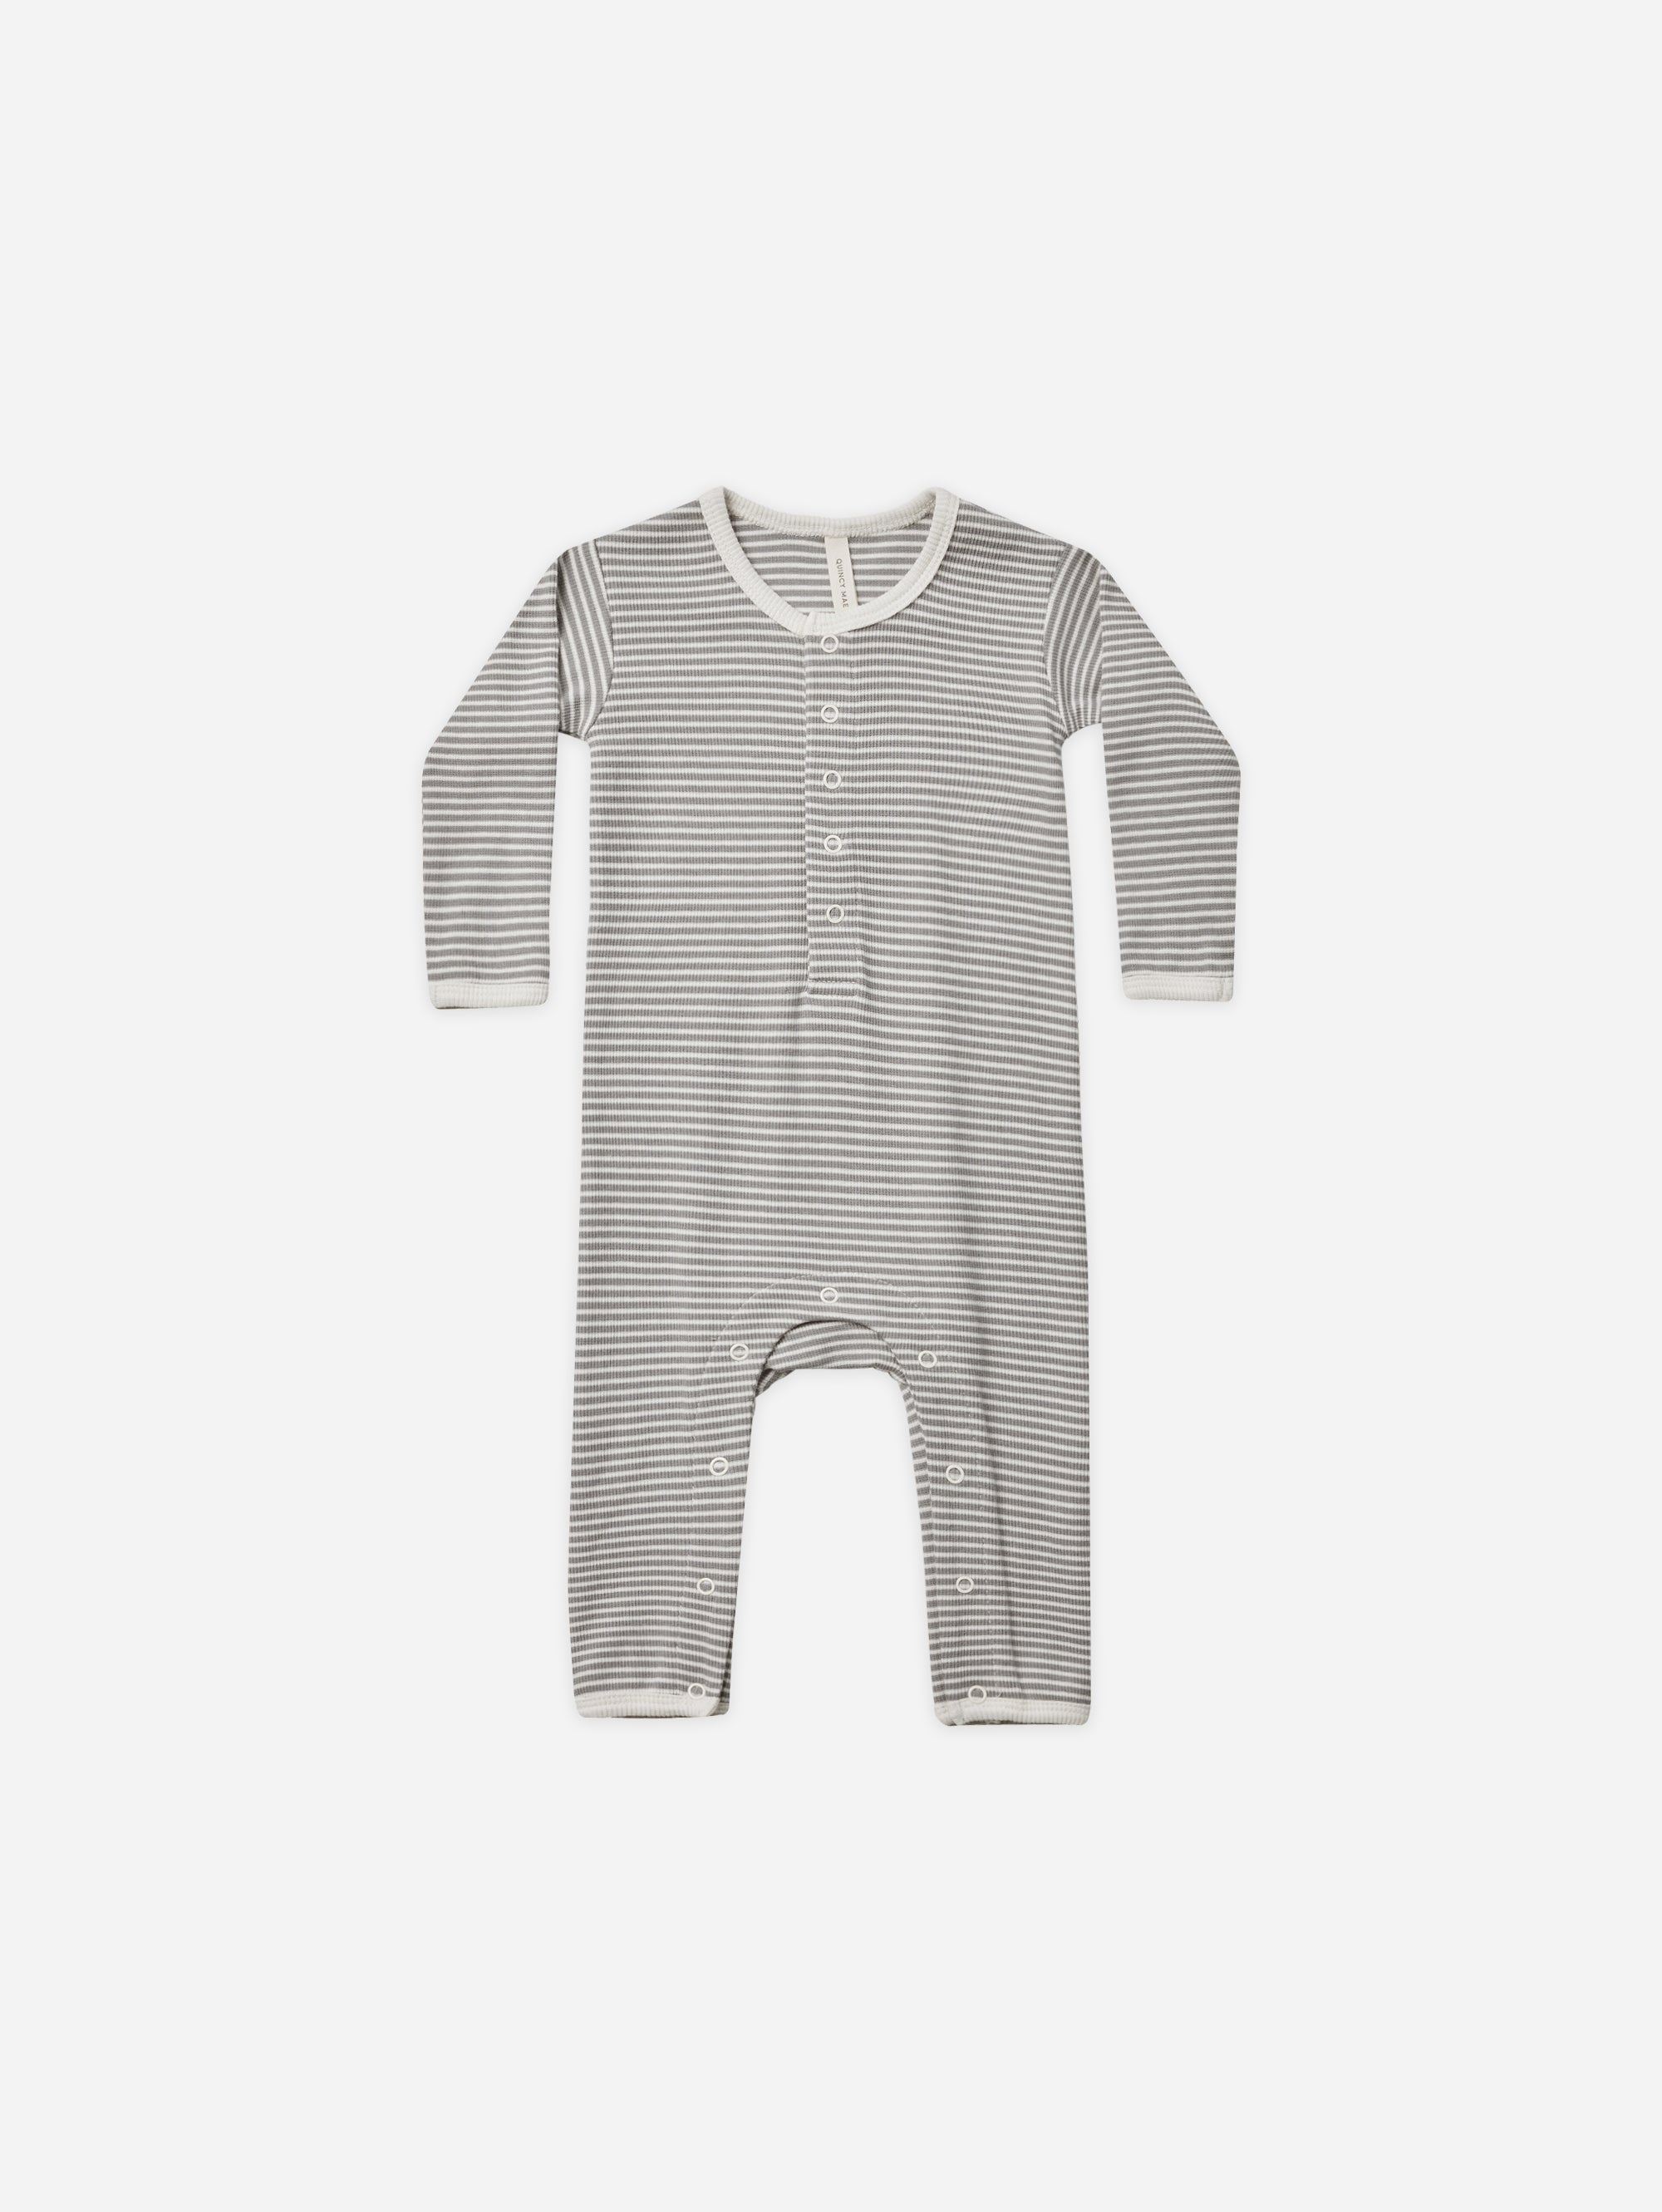 Ribbed Baby Jumpsuit || Lagoon Micro Stripe - Rylee + Cru | Kids Clothes | Trendy Baby Clothes | Modern Infant Outfits |